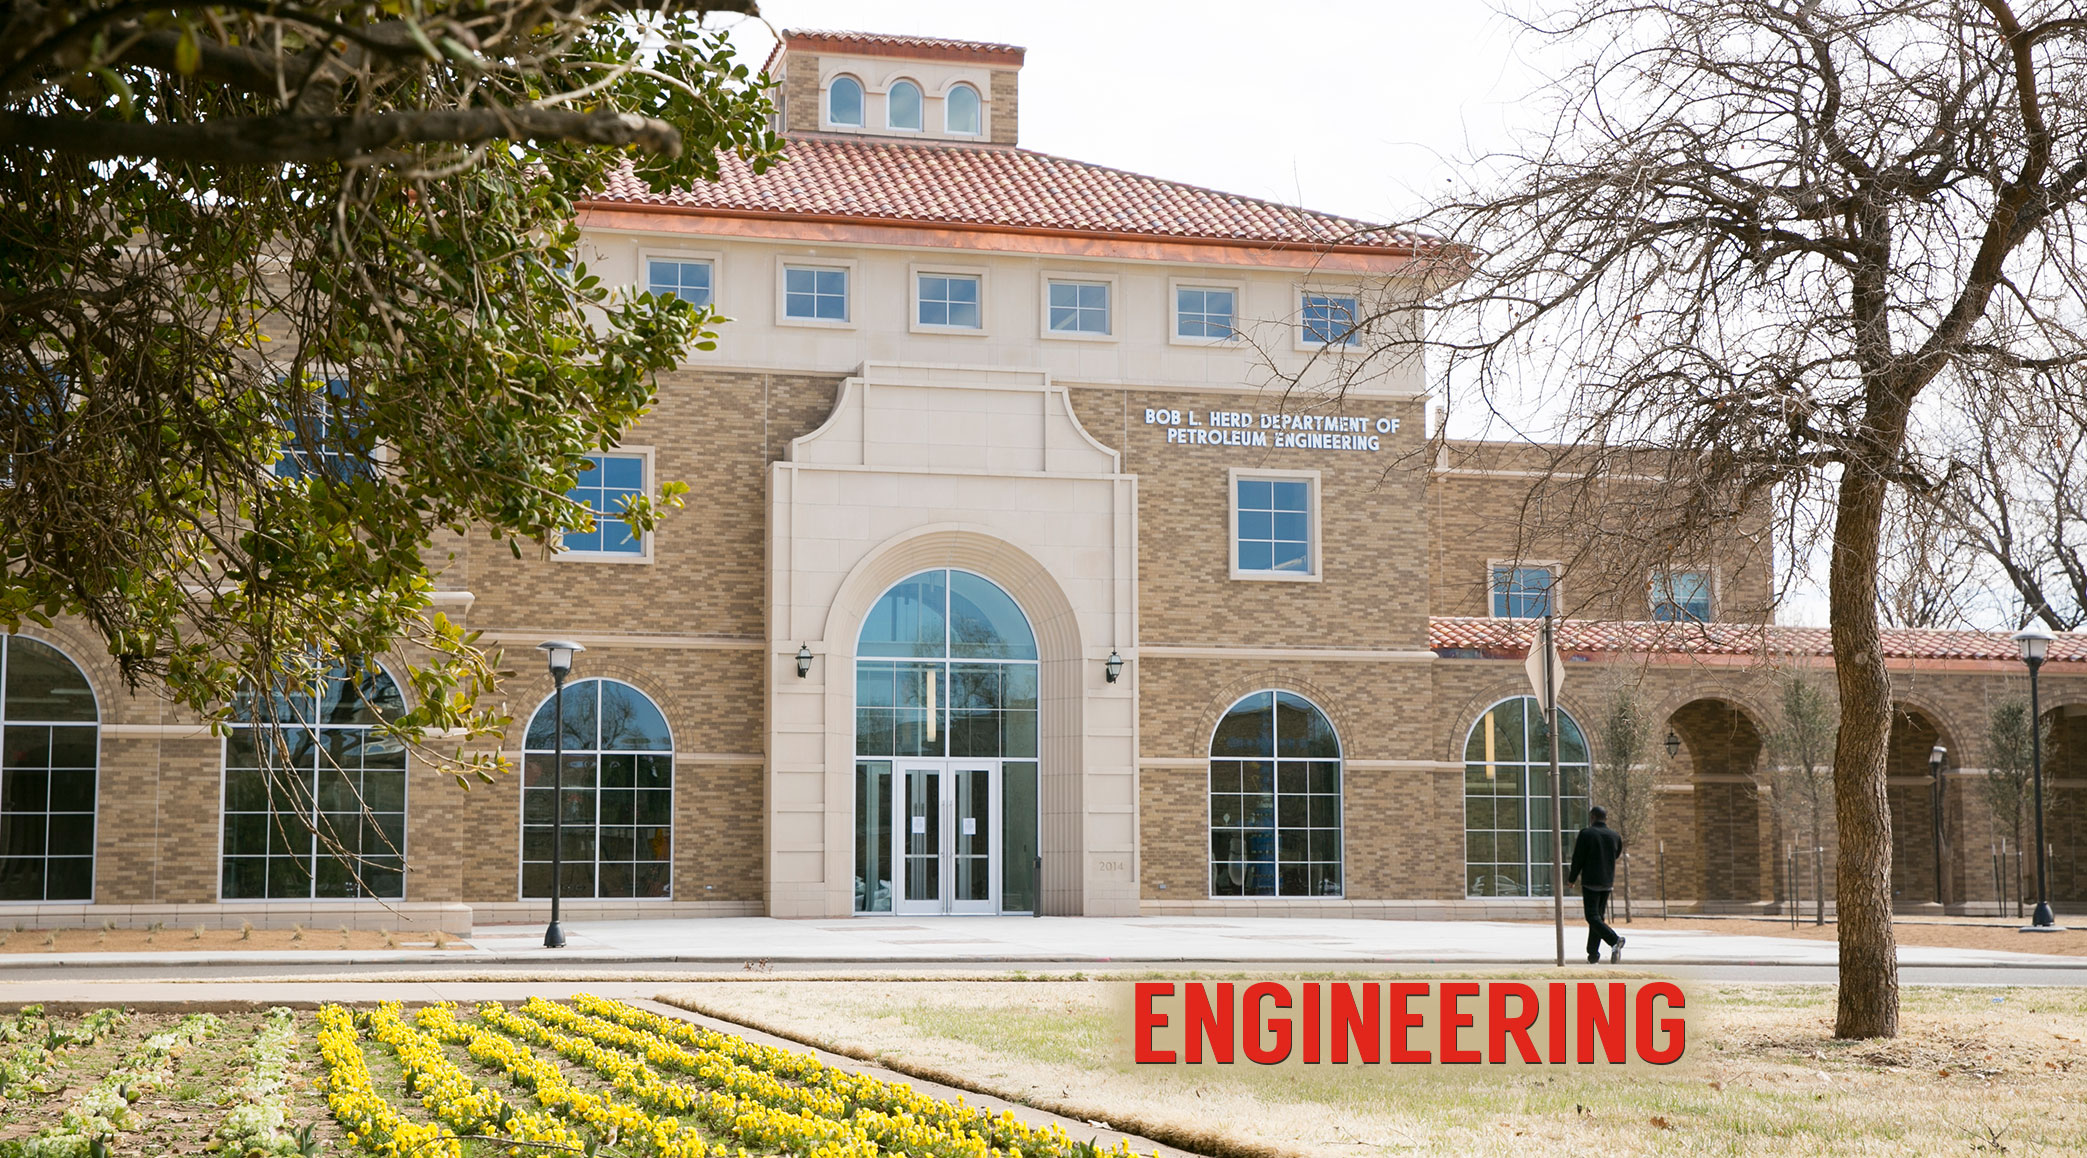 Looking only for Engineering students? The Engineering Opportunities Center is a great resource for employers.